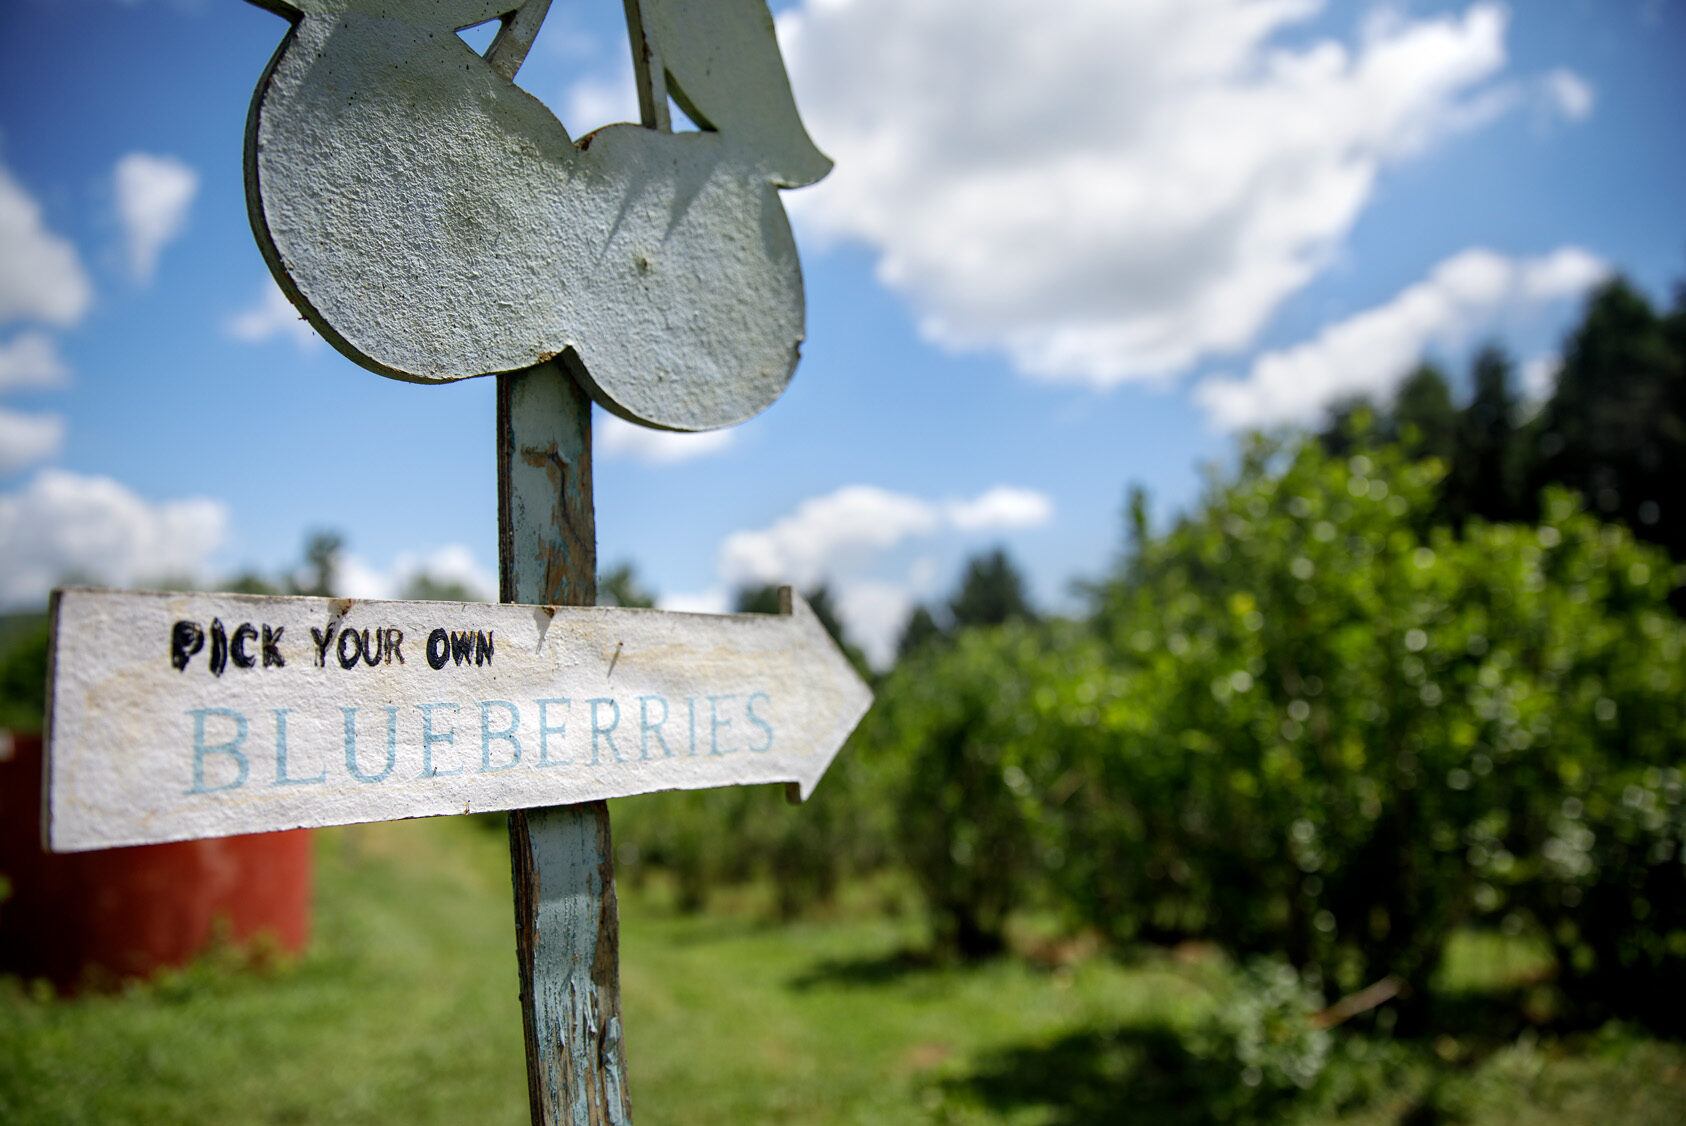 Pick-your-own blueberries sign at a farm in Upstate New York